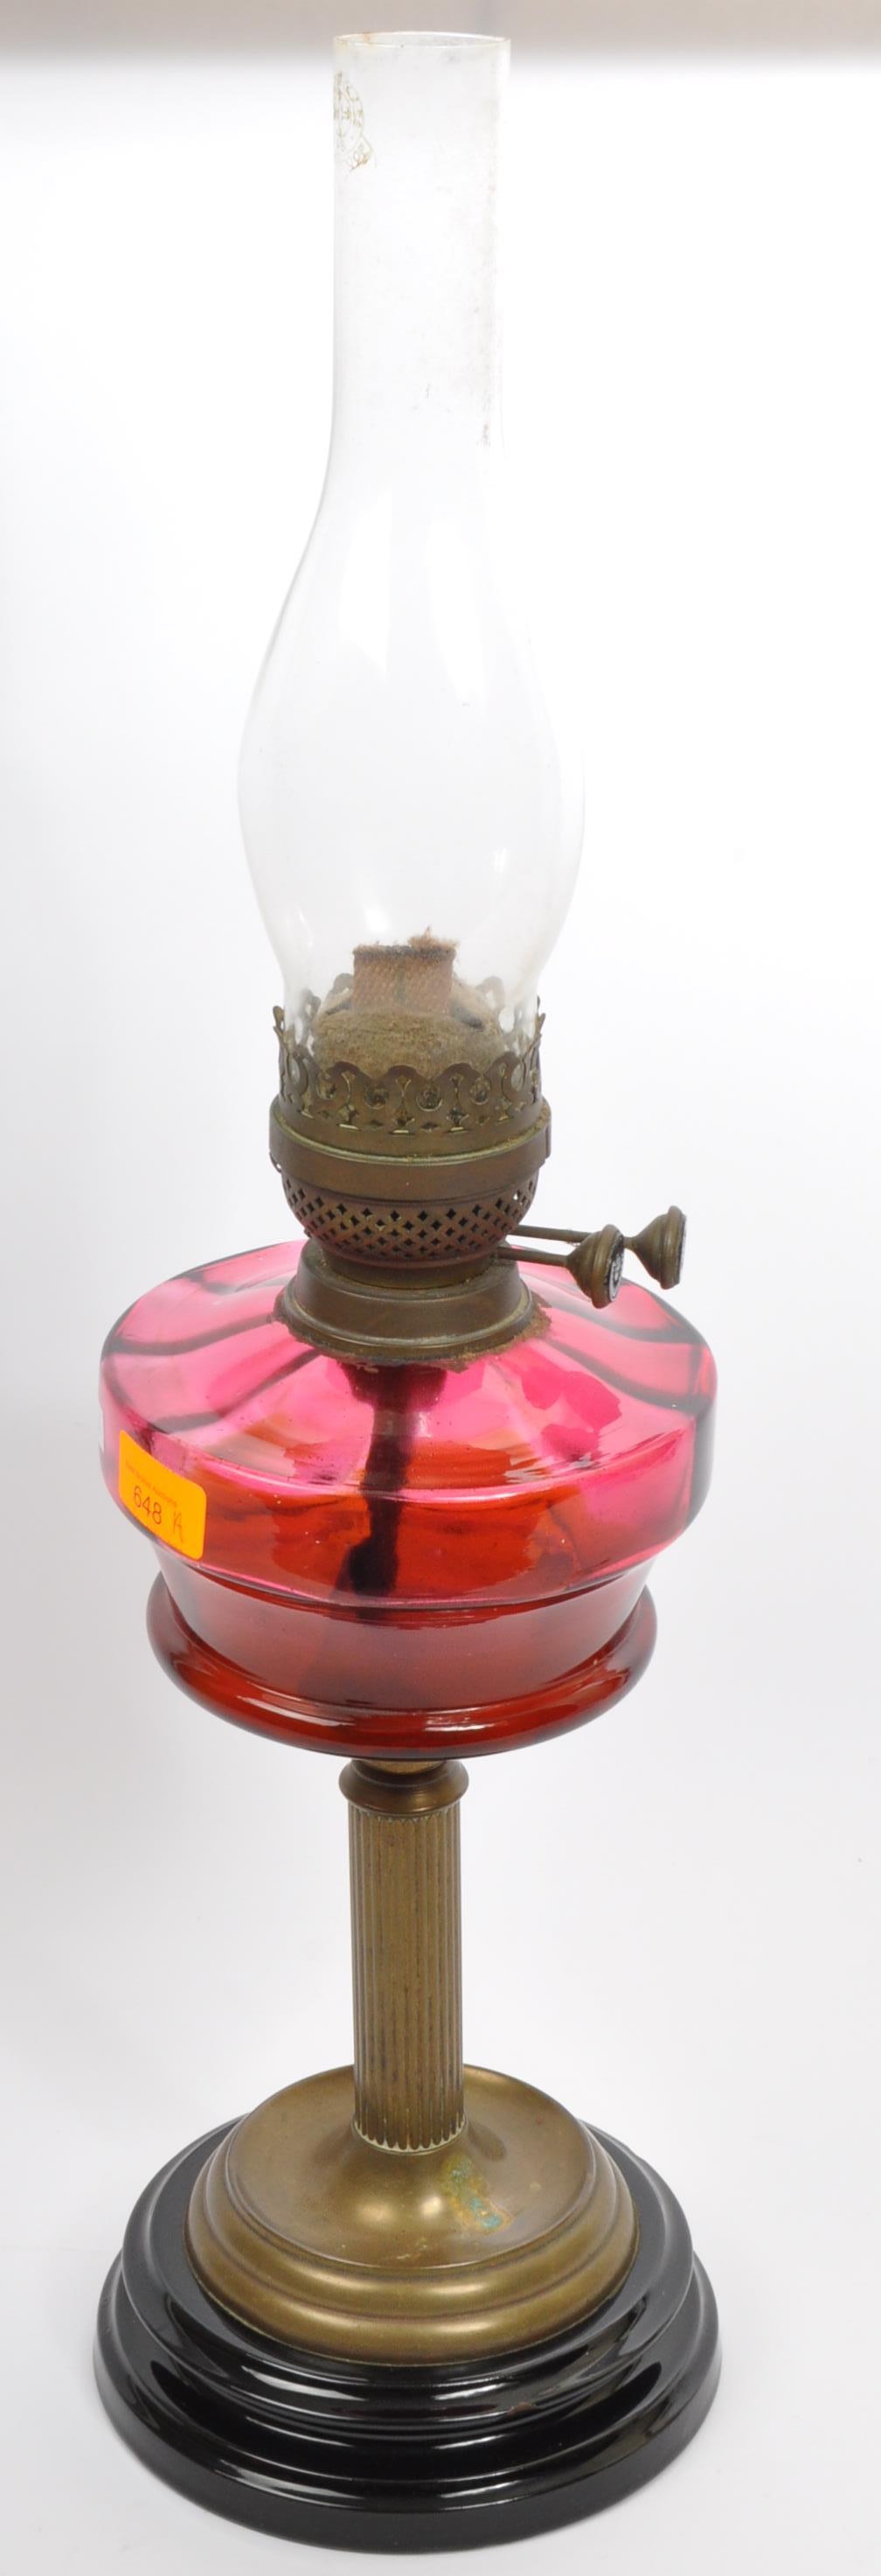 19TH CENTURY CRANBERRY GLASS AND BRASS OIL LAMP - Image 2 of 6